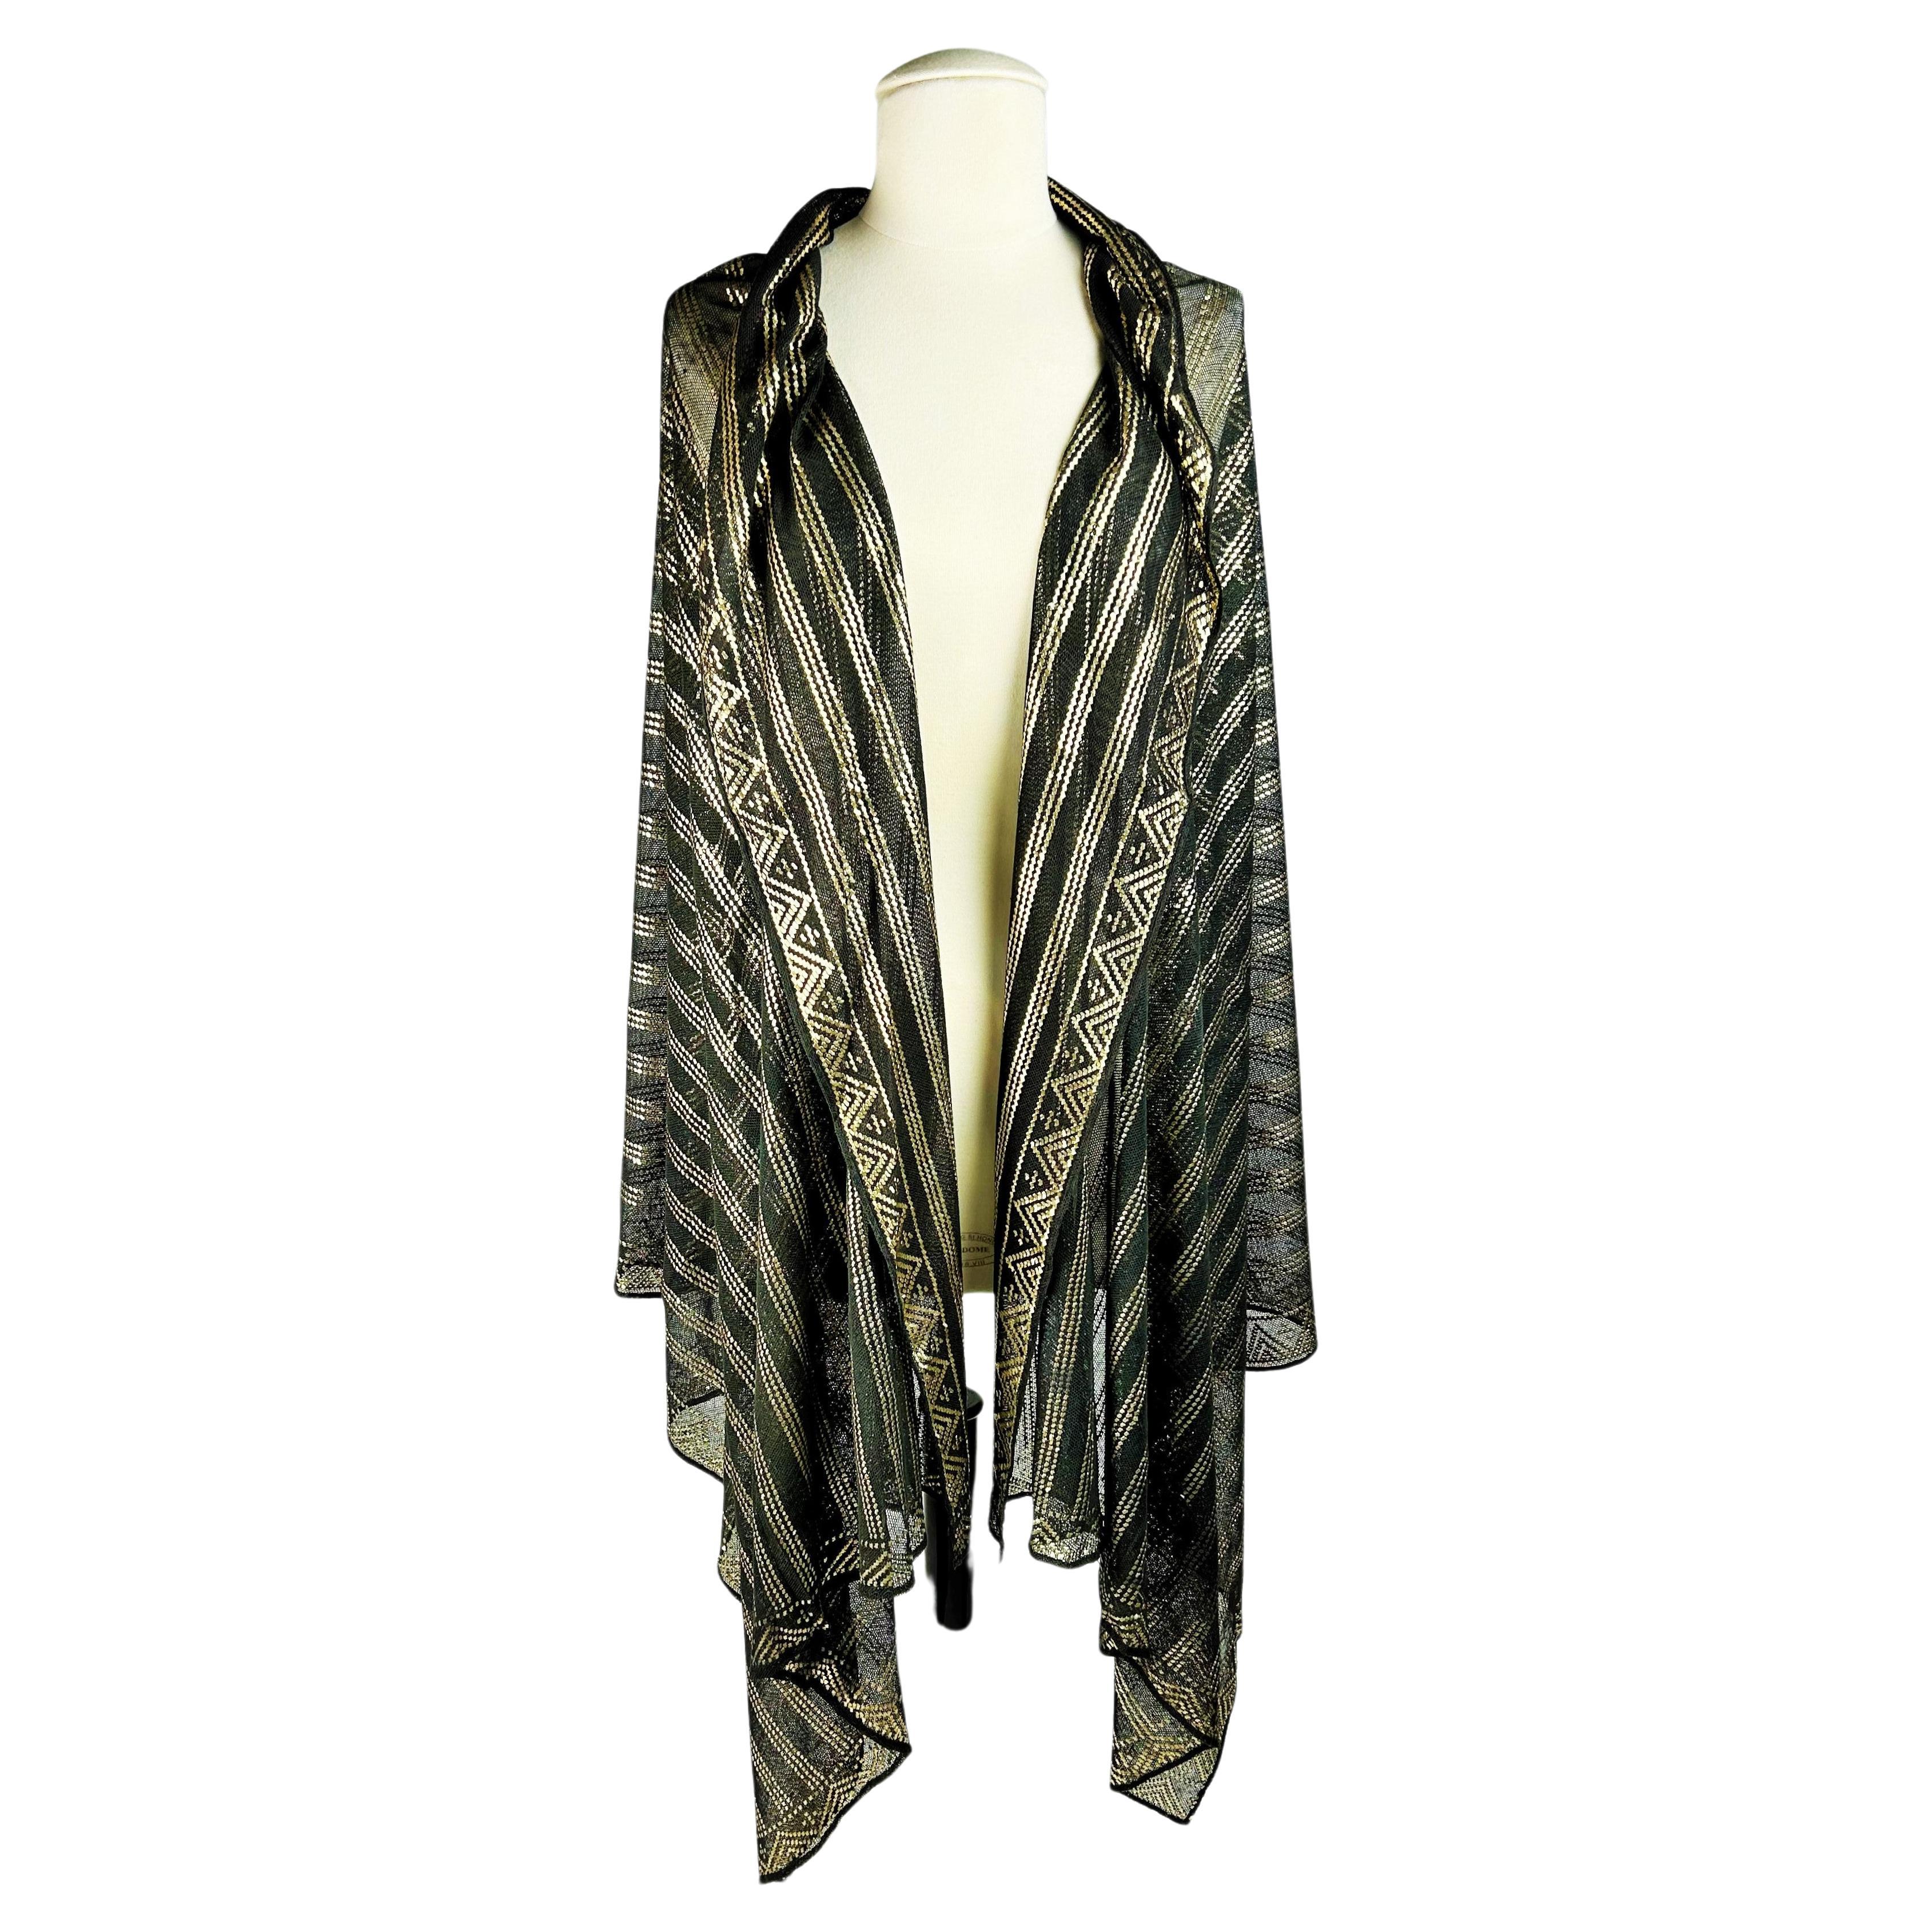 Assuit shawl in cotton voile and gilded metal strips - Egypt Circa 1930-1940 For Sale